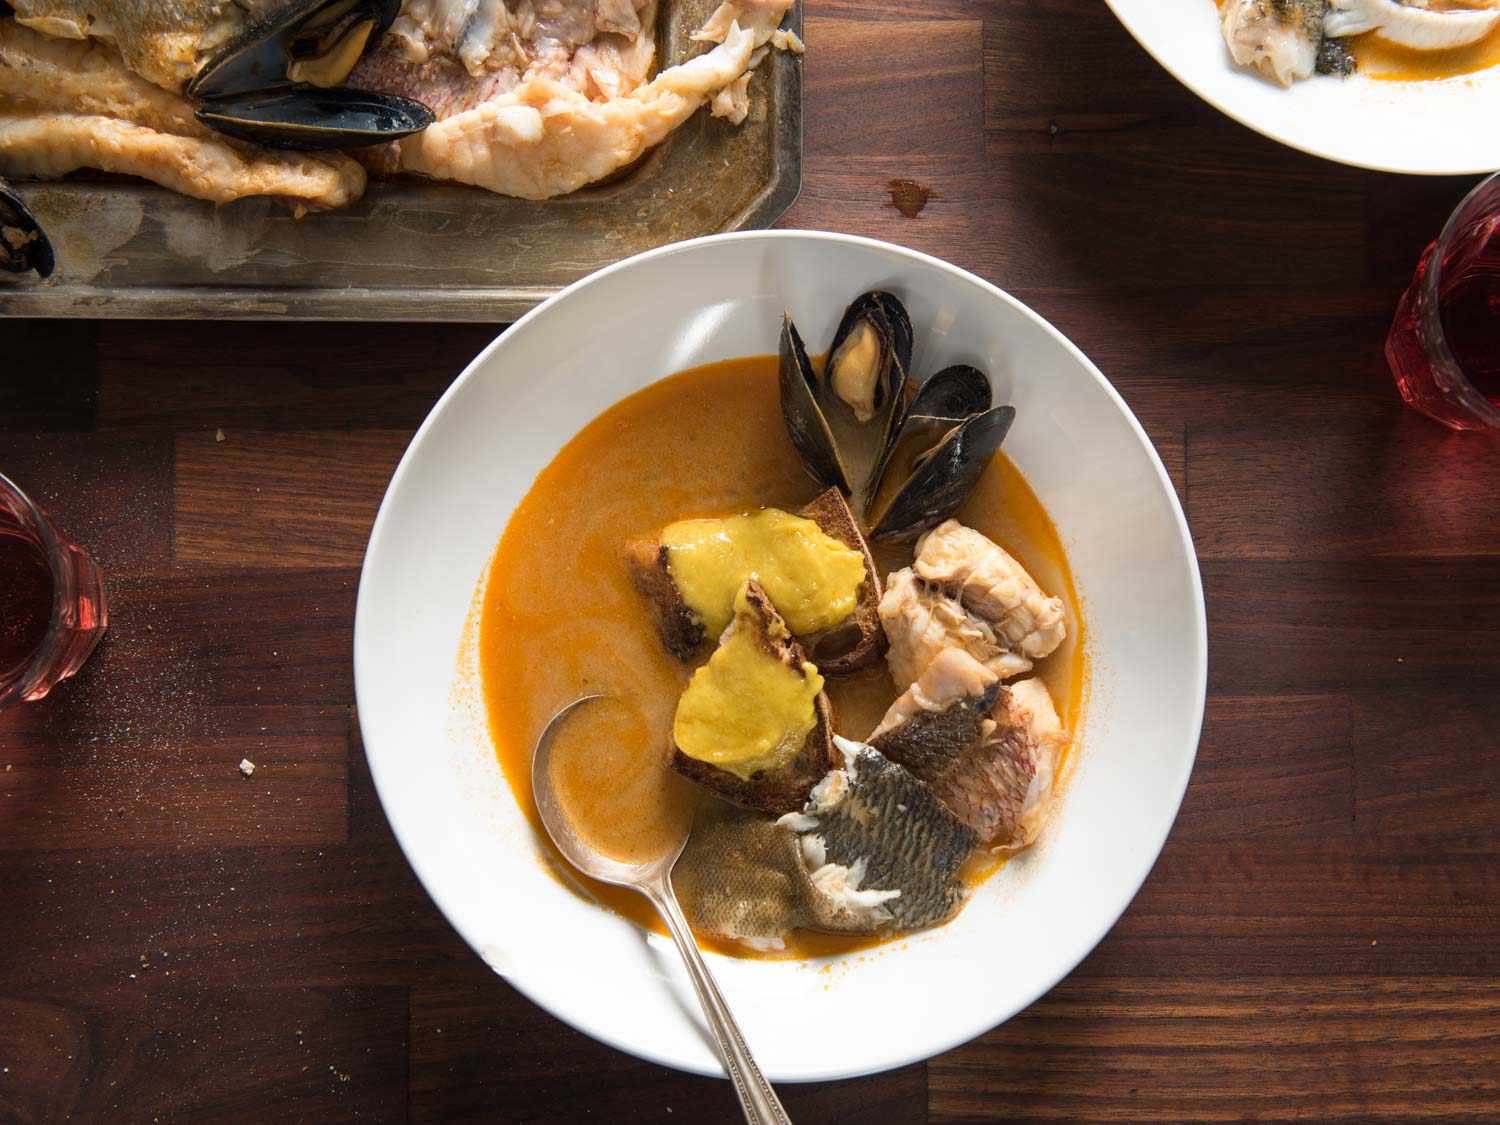 Top down view of a bowl of bouillabaisse, topped with mussels, pieces of fish and rouille.